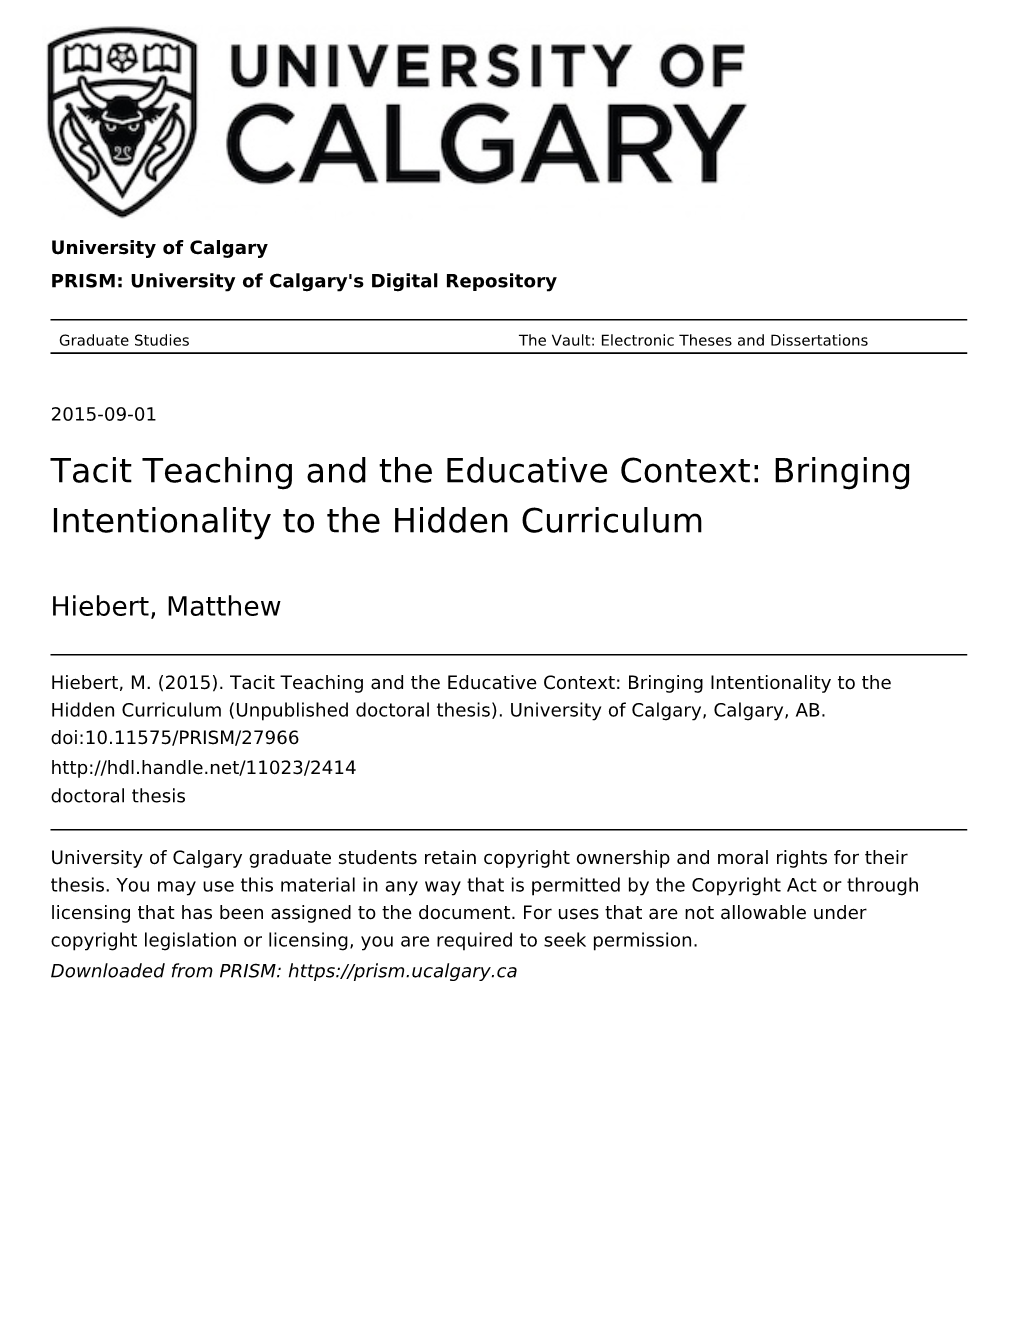 Tacit Teaching and the Educative Context: Bringing Intentionality to the Hidden Curriculum